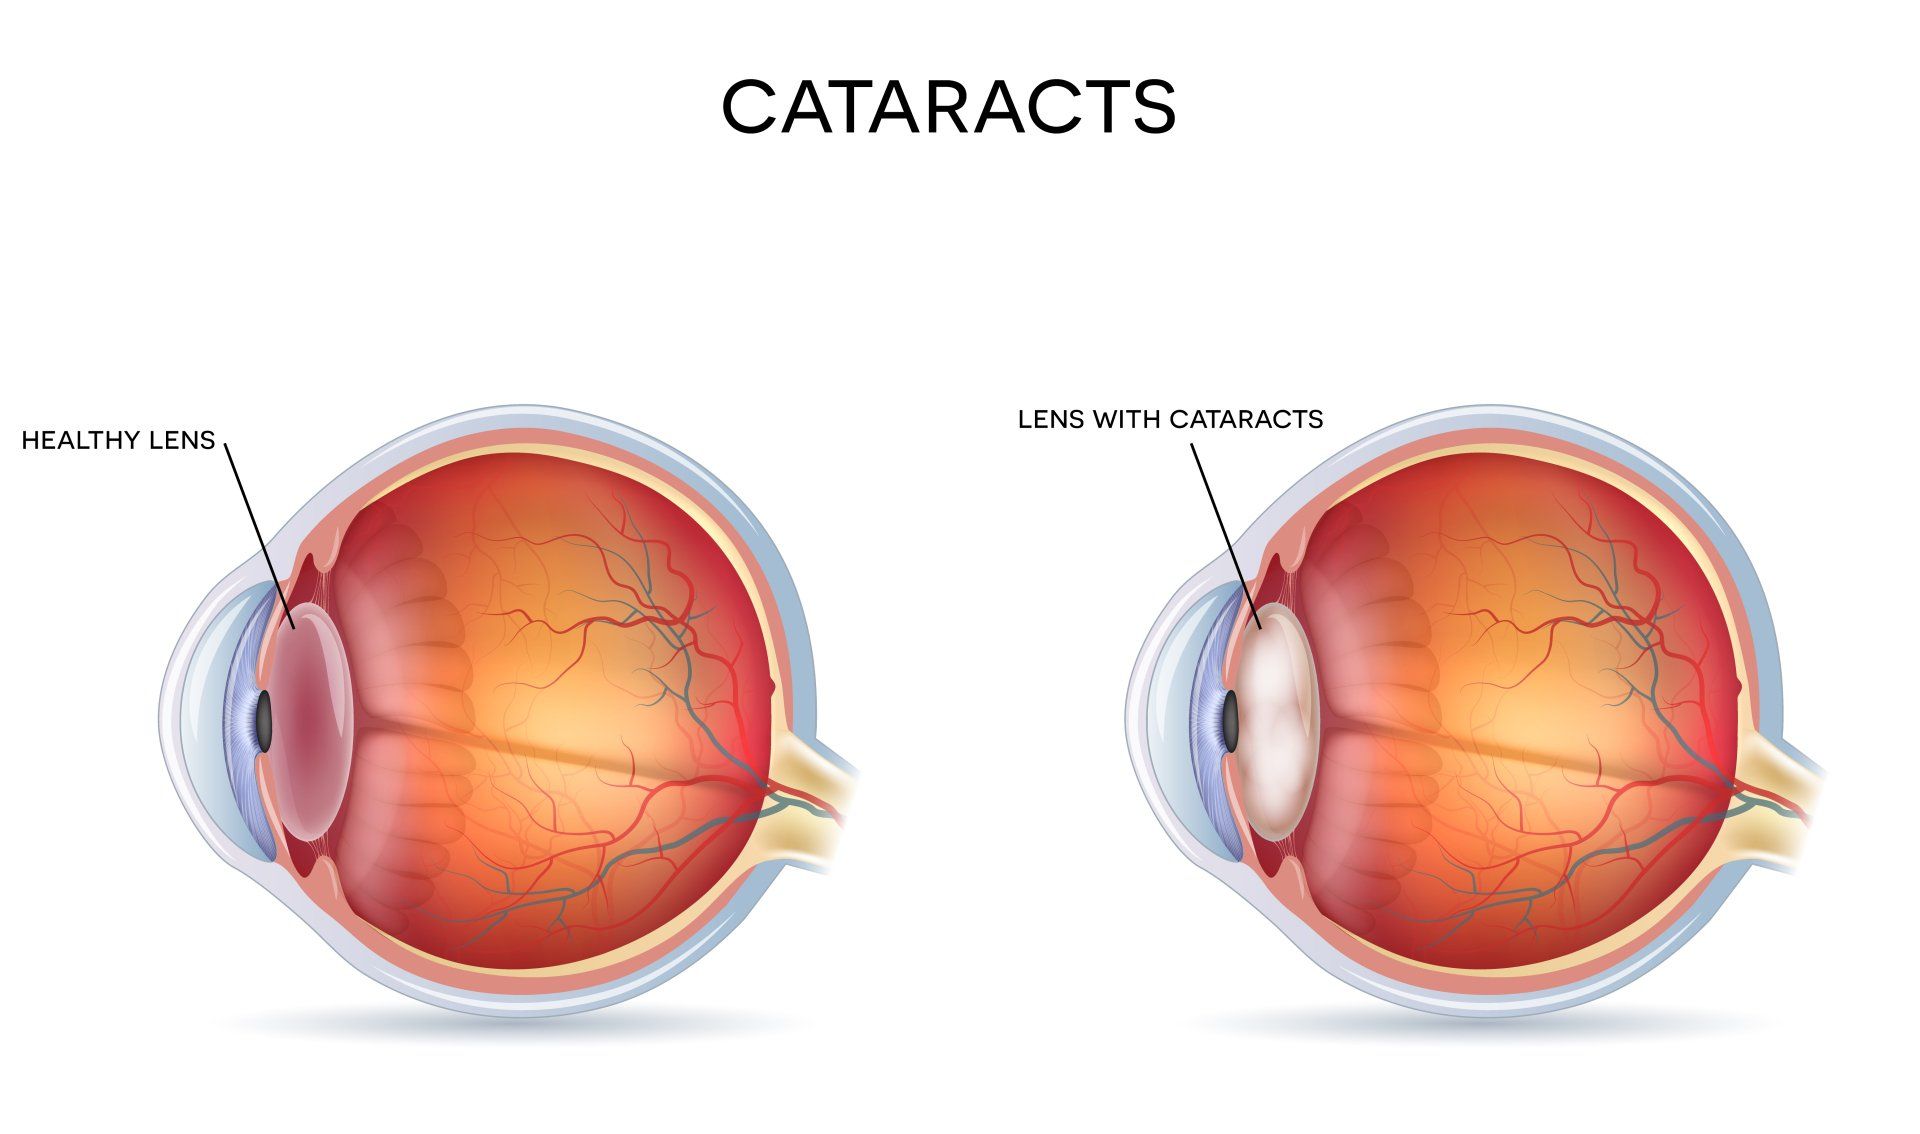 cataract diagram showing healthy lens and lens with cataract